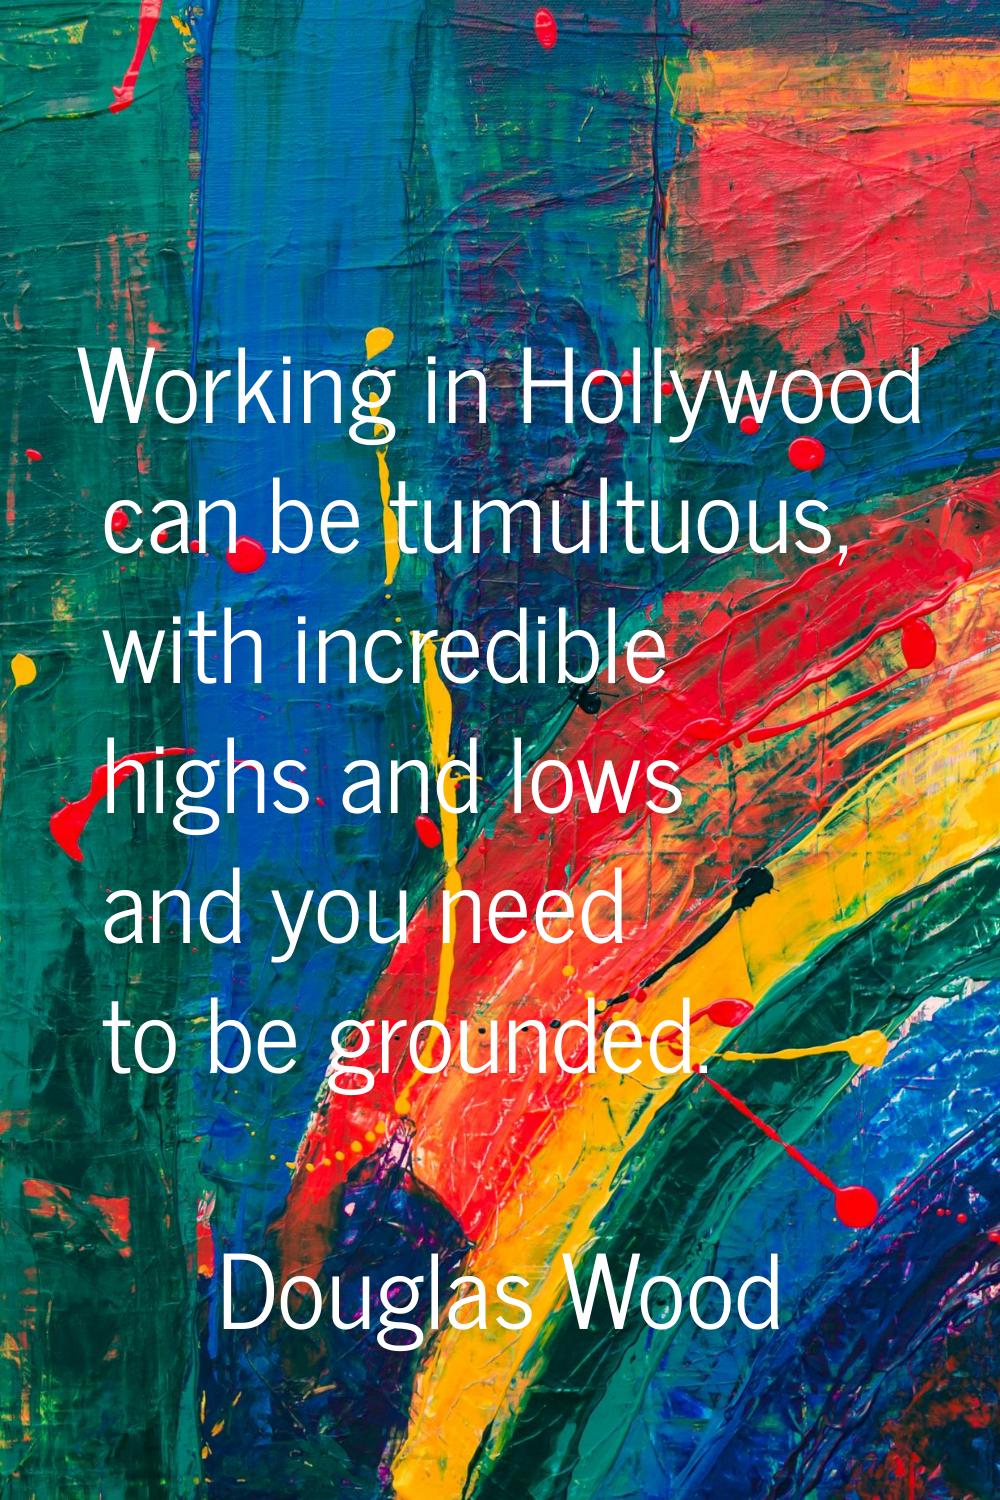 Working in Hollywood can be tumultuous, with incredible highs and lows and you need to be grounded.